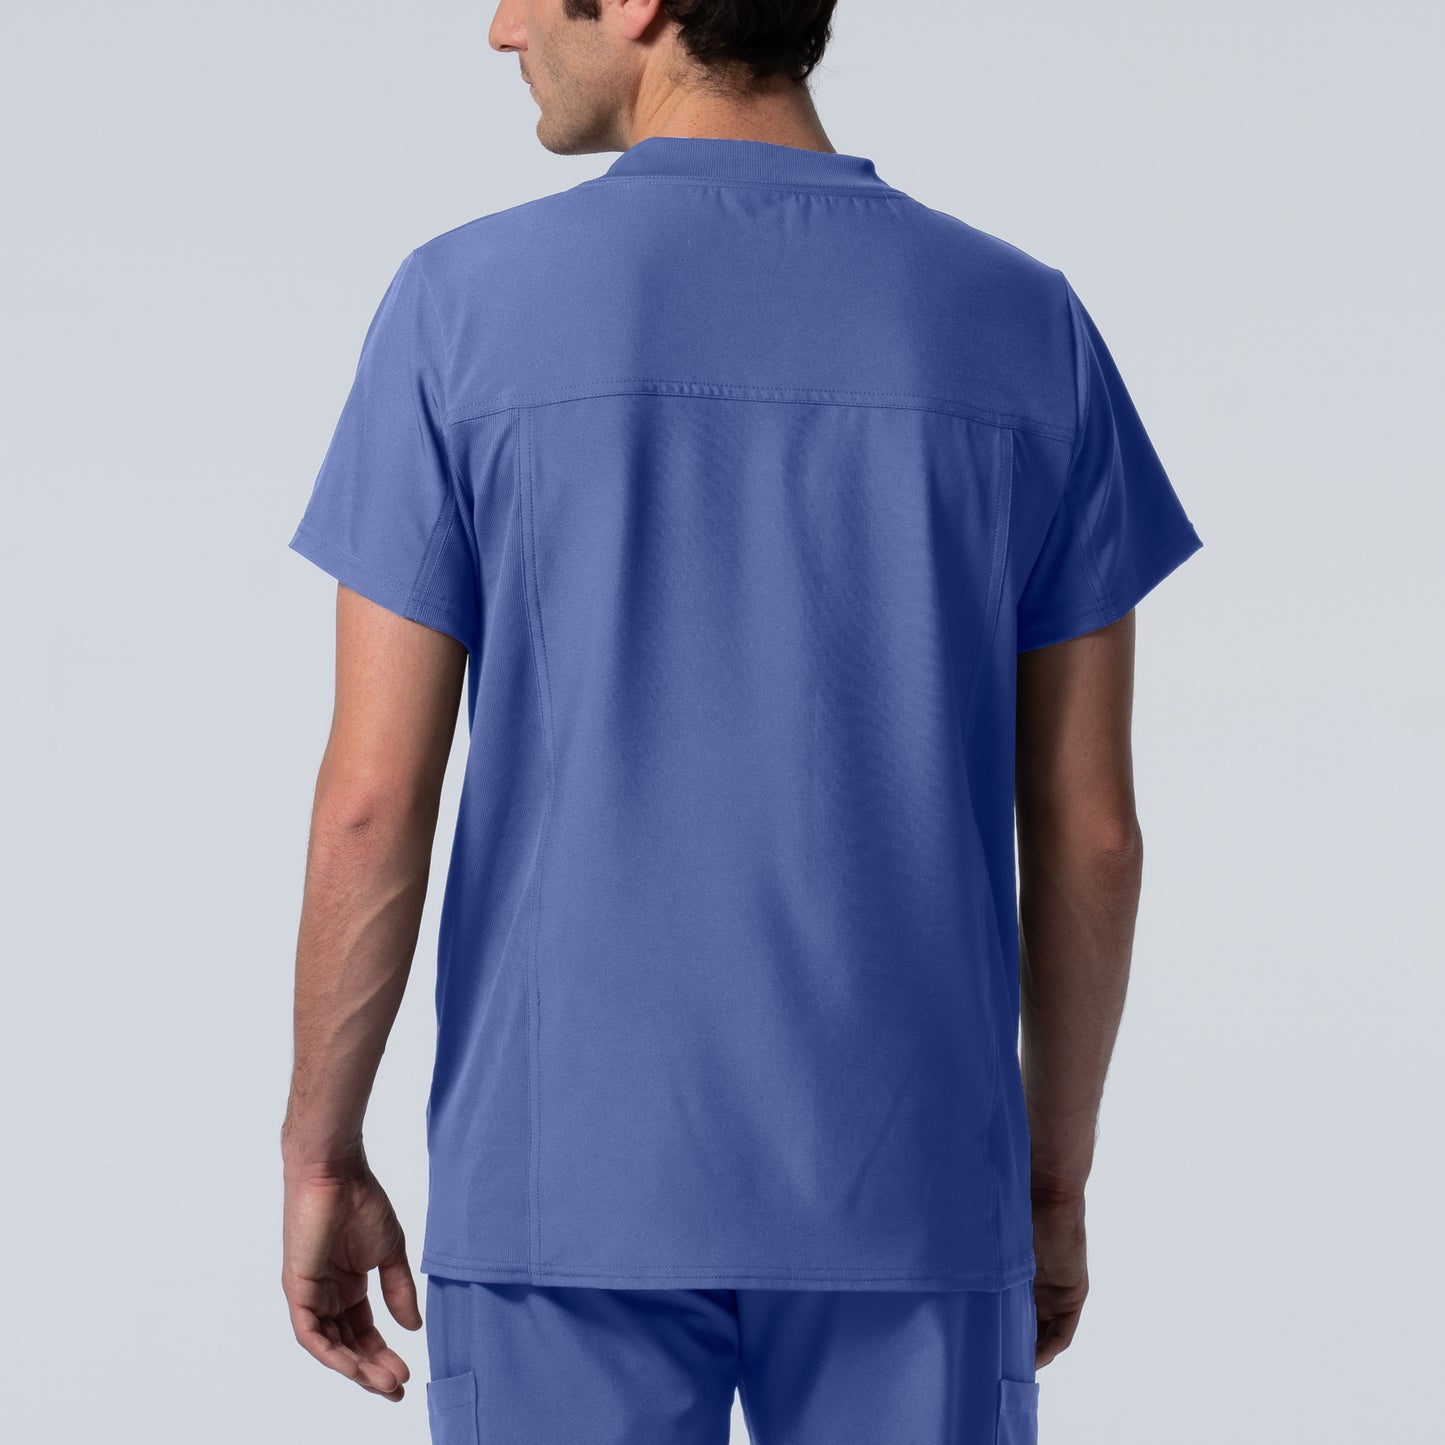 Men's top with two pockets - FORWARD - L111H